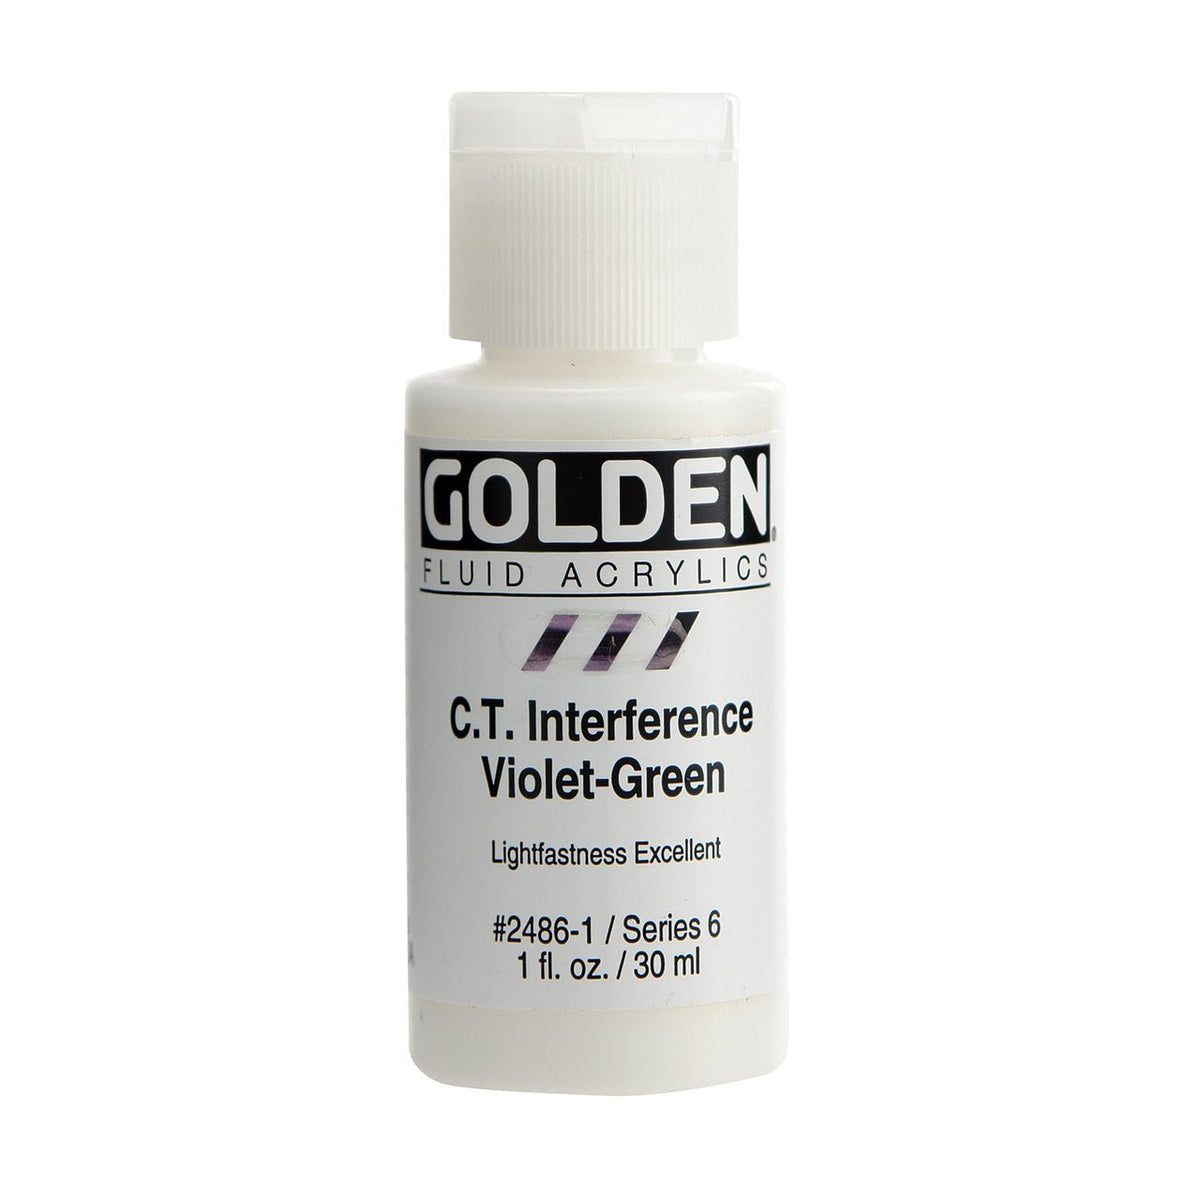 Golden Fluid Acrylic Interference C.T. Violet-Green 1 oz - merriartist.com